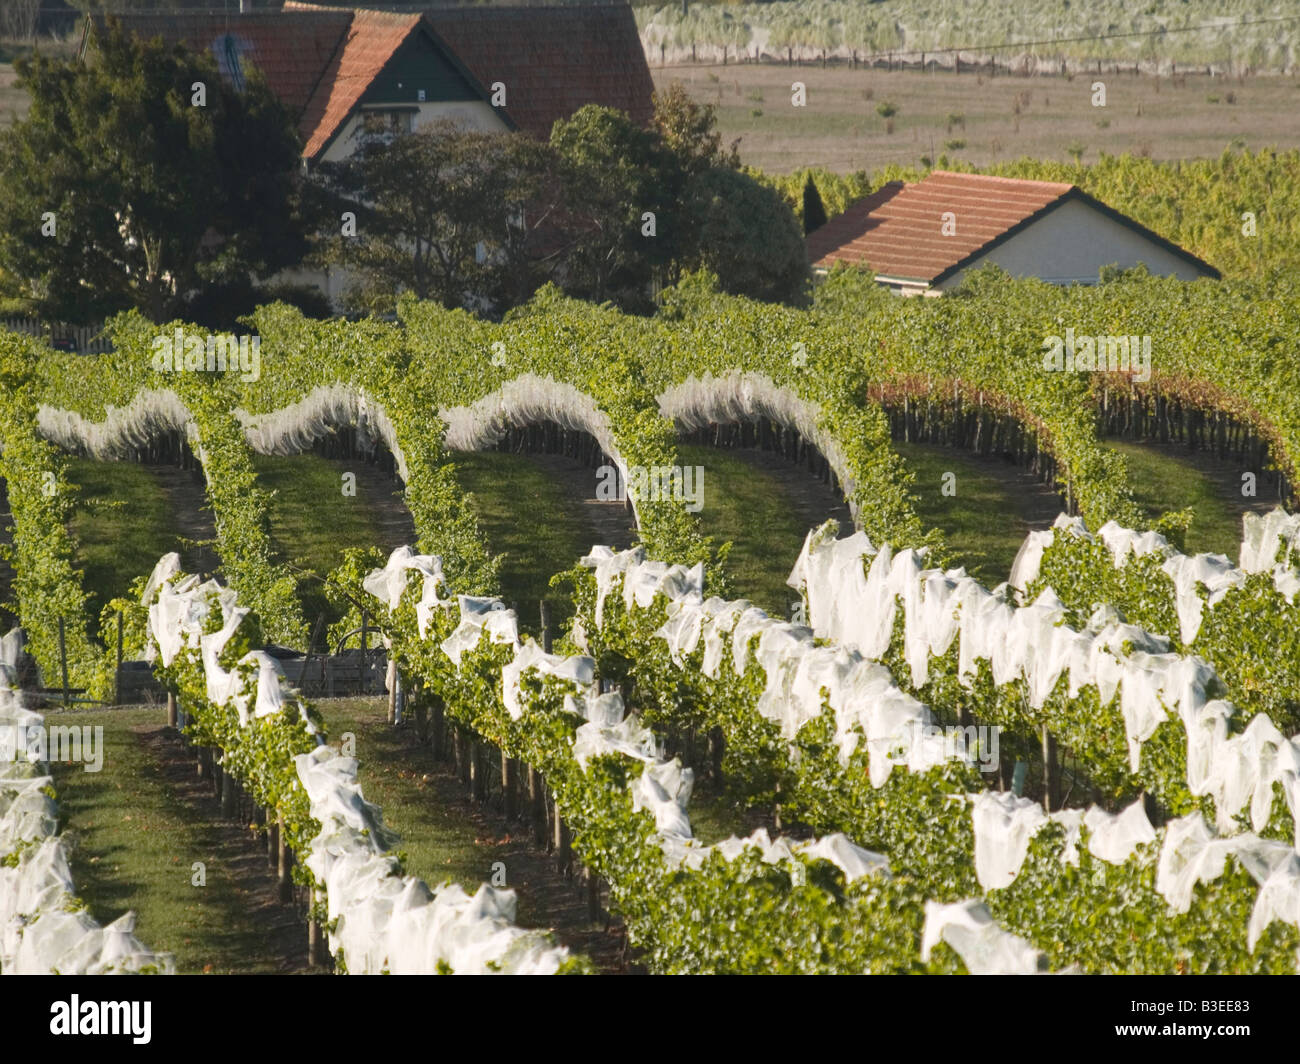 Bird nets covering red wine grapes growing on vines grapevines at Black Barn vineyard Hawkes Bay New Zealand Stock Photo